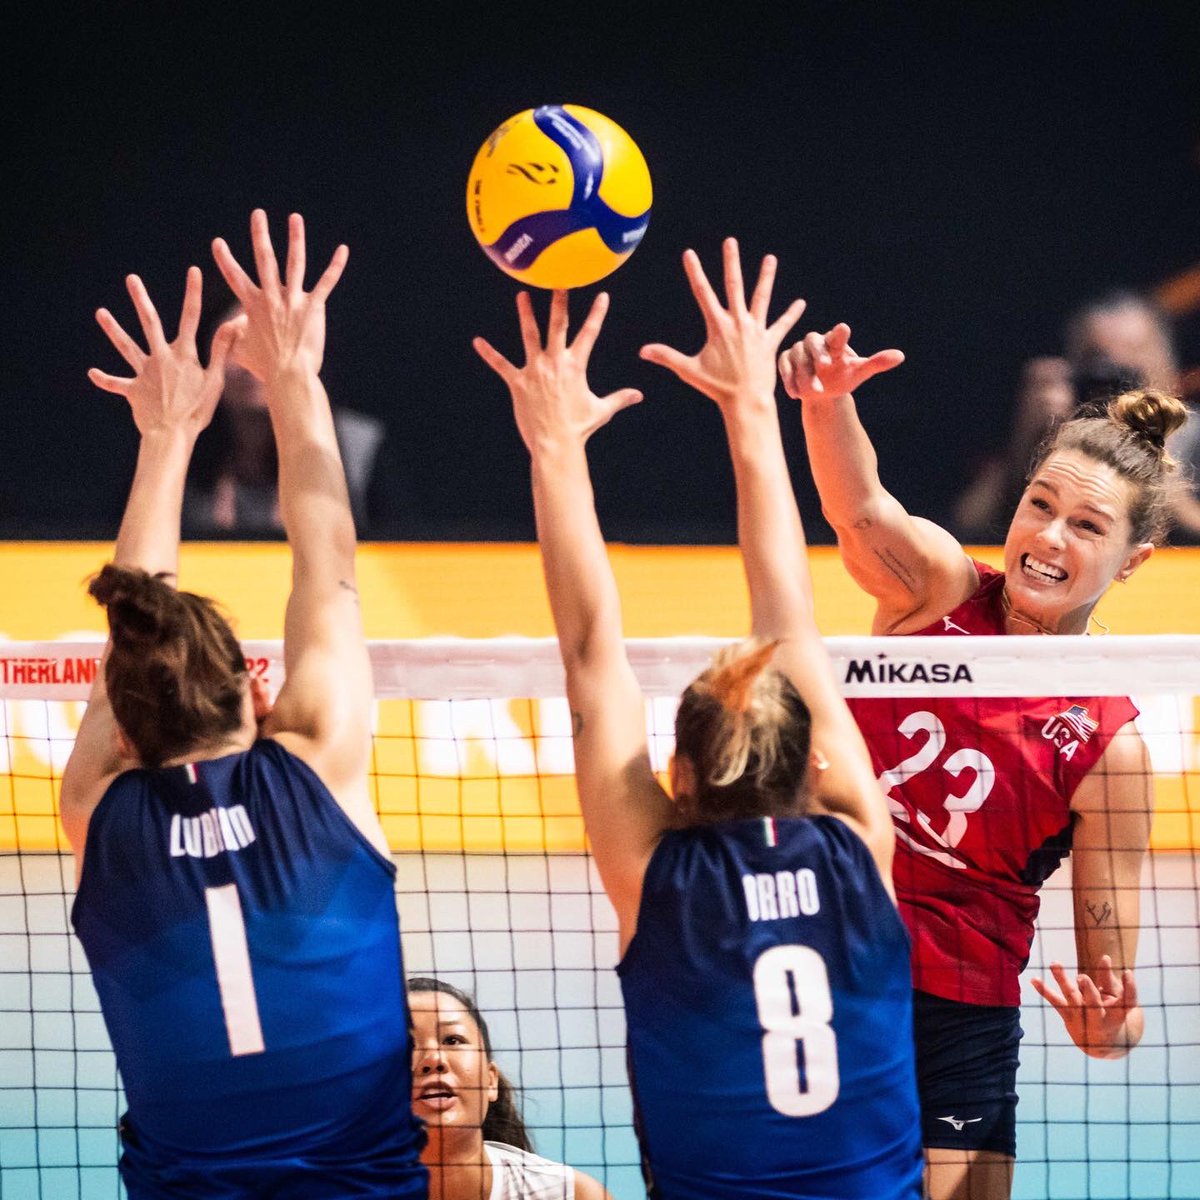 USA 🇺🇸 4th place at Women’s World Championship USA 🇺🇸 lost the bronze medal match to Italy 🇮🇹 3-0 (25-20, 25-15, 27-25) 📸 @volleyballworld #norceca #volleyball #wwch2022 #electrifying2022